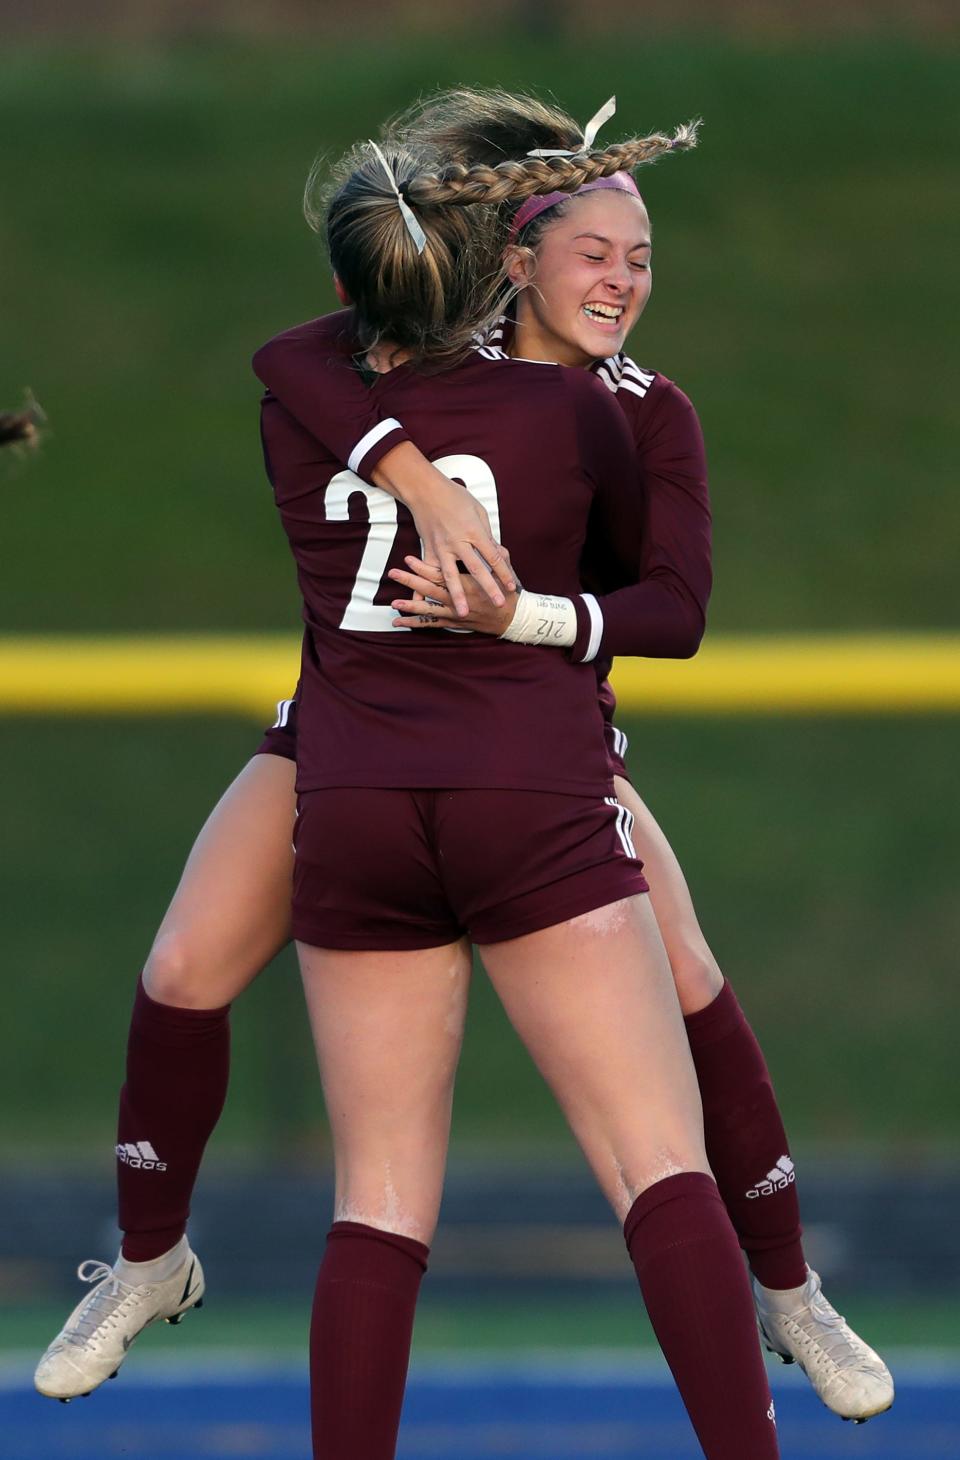 Walsh Jesuit's Sara Costantini, facing, celebrates with Kayla Flory after her goal during the first half of a Division I district championship soccer game against Green at NDCL, Thursday, Oct. 27, 2022, in Chardon, Ohio.